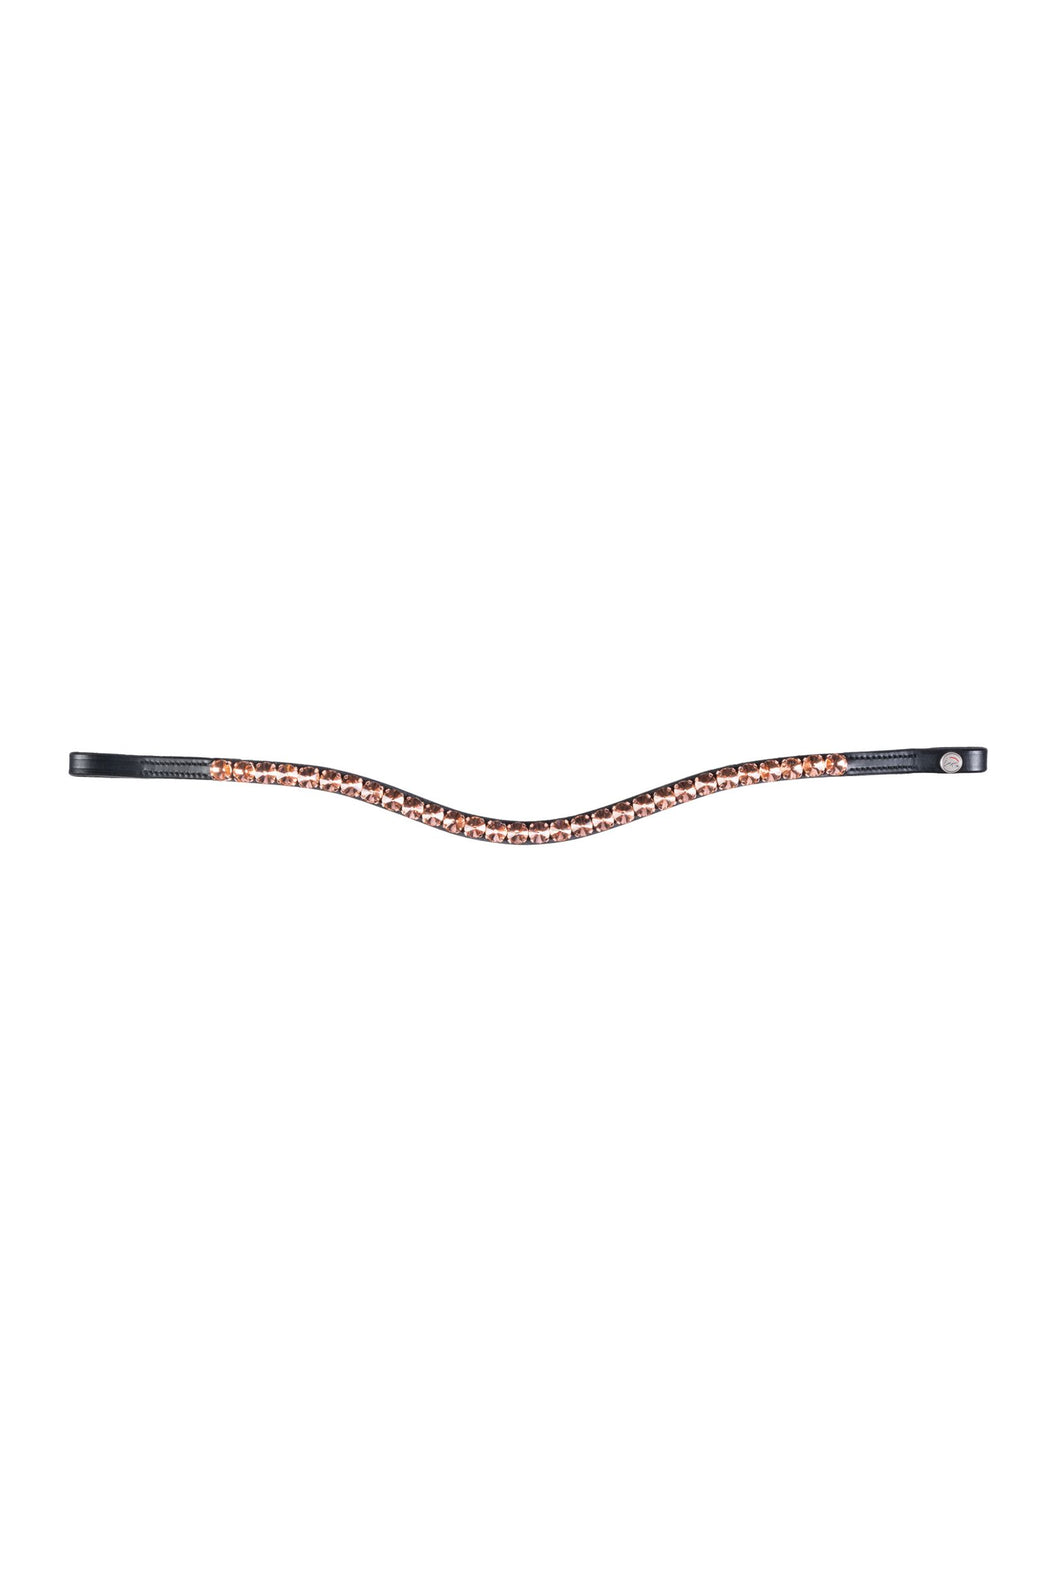 HKM Browband Rose Gold Glamour